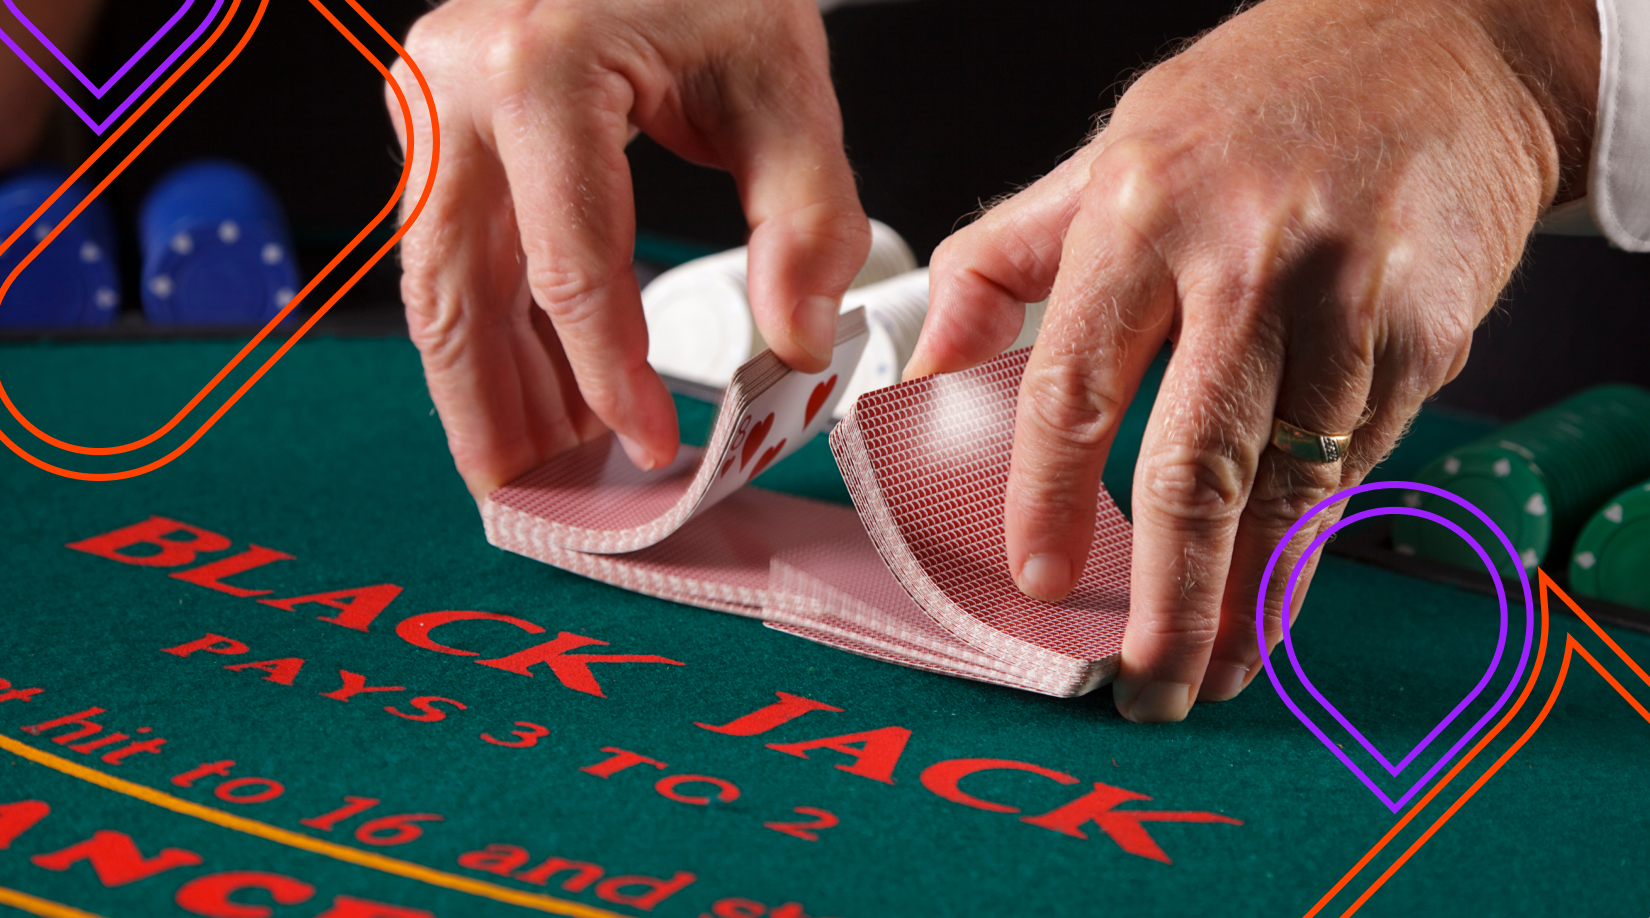 What are blackjack side bets?